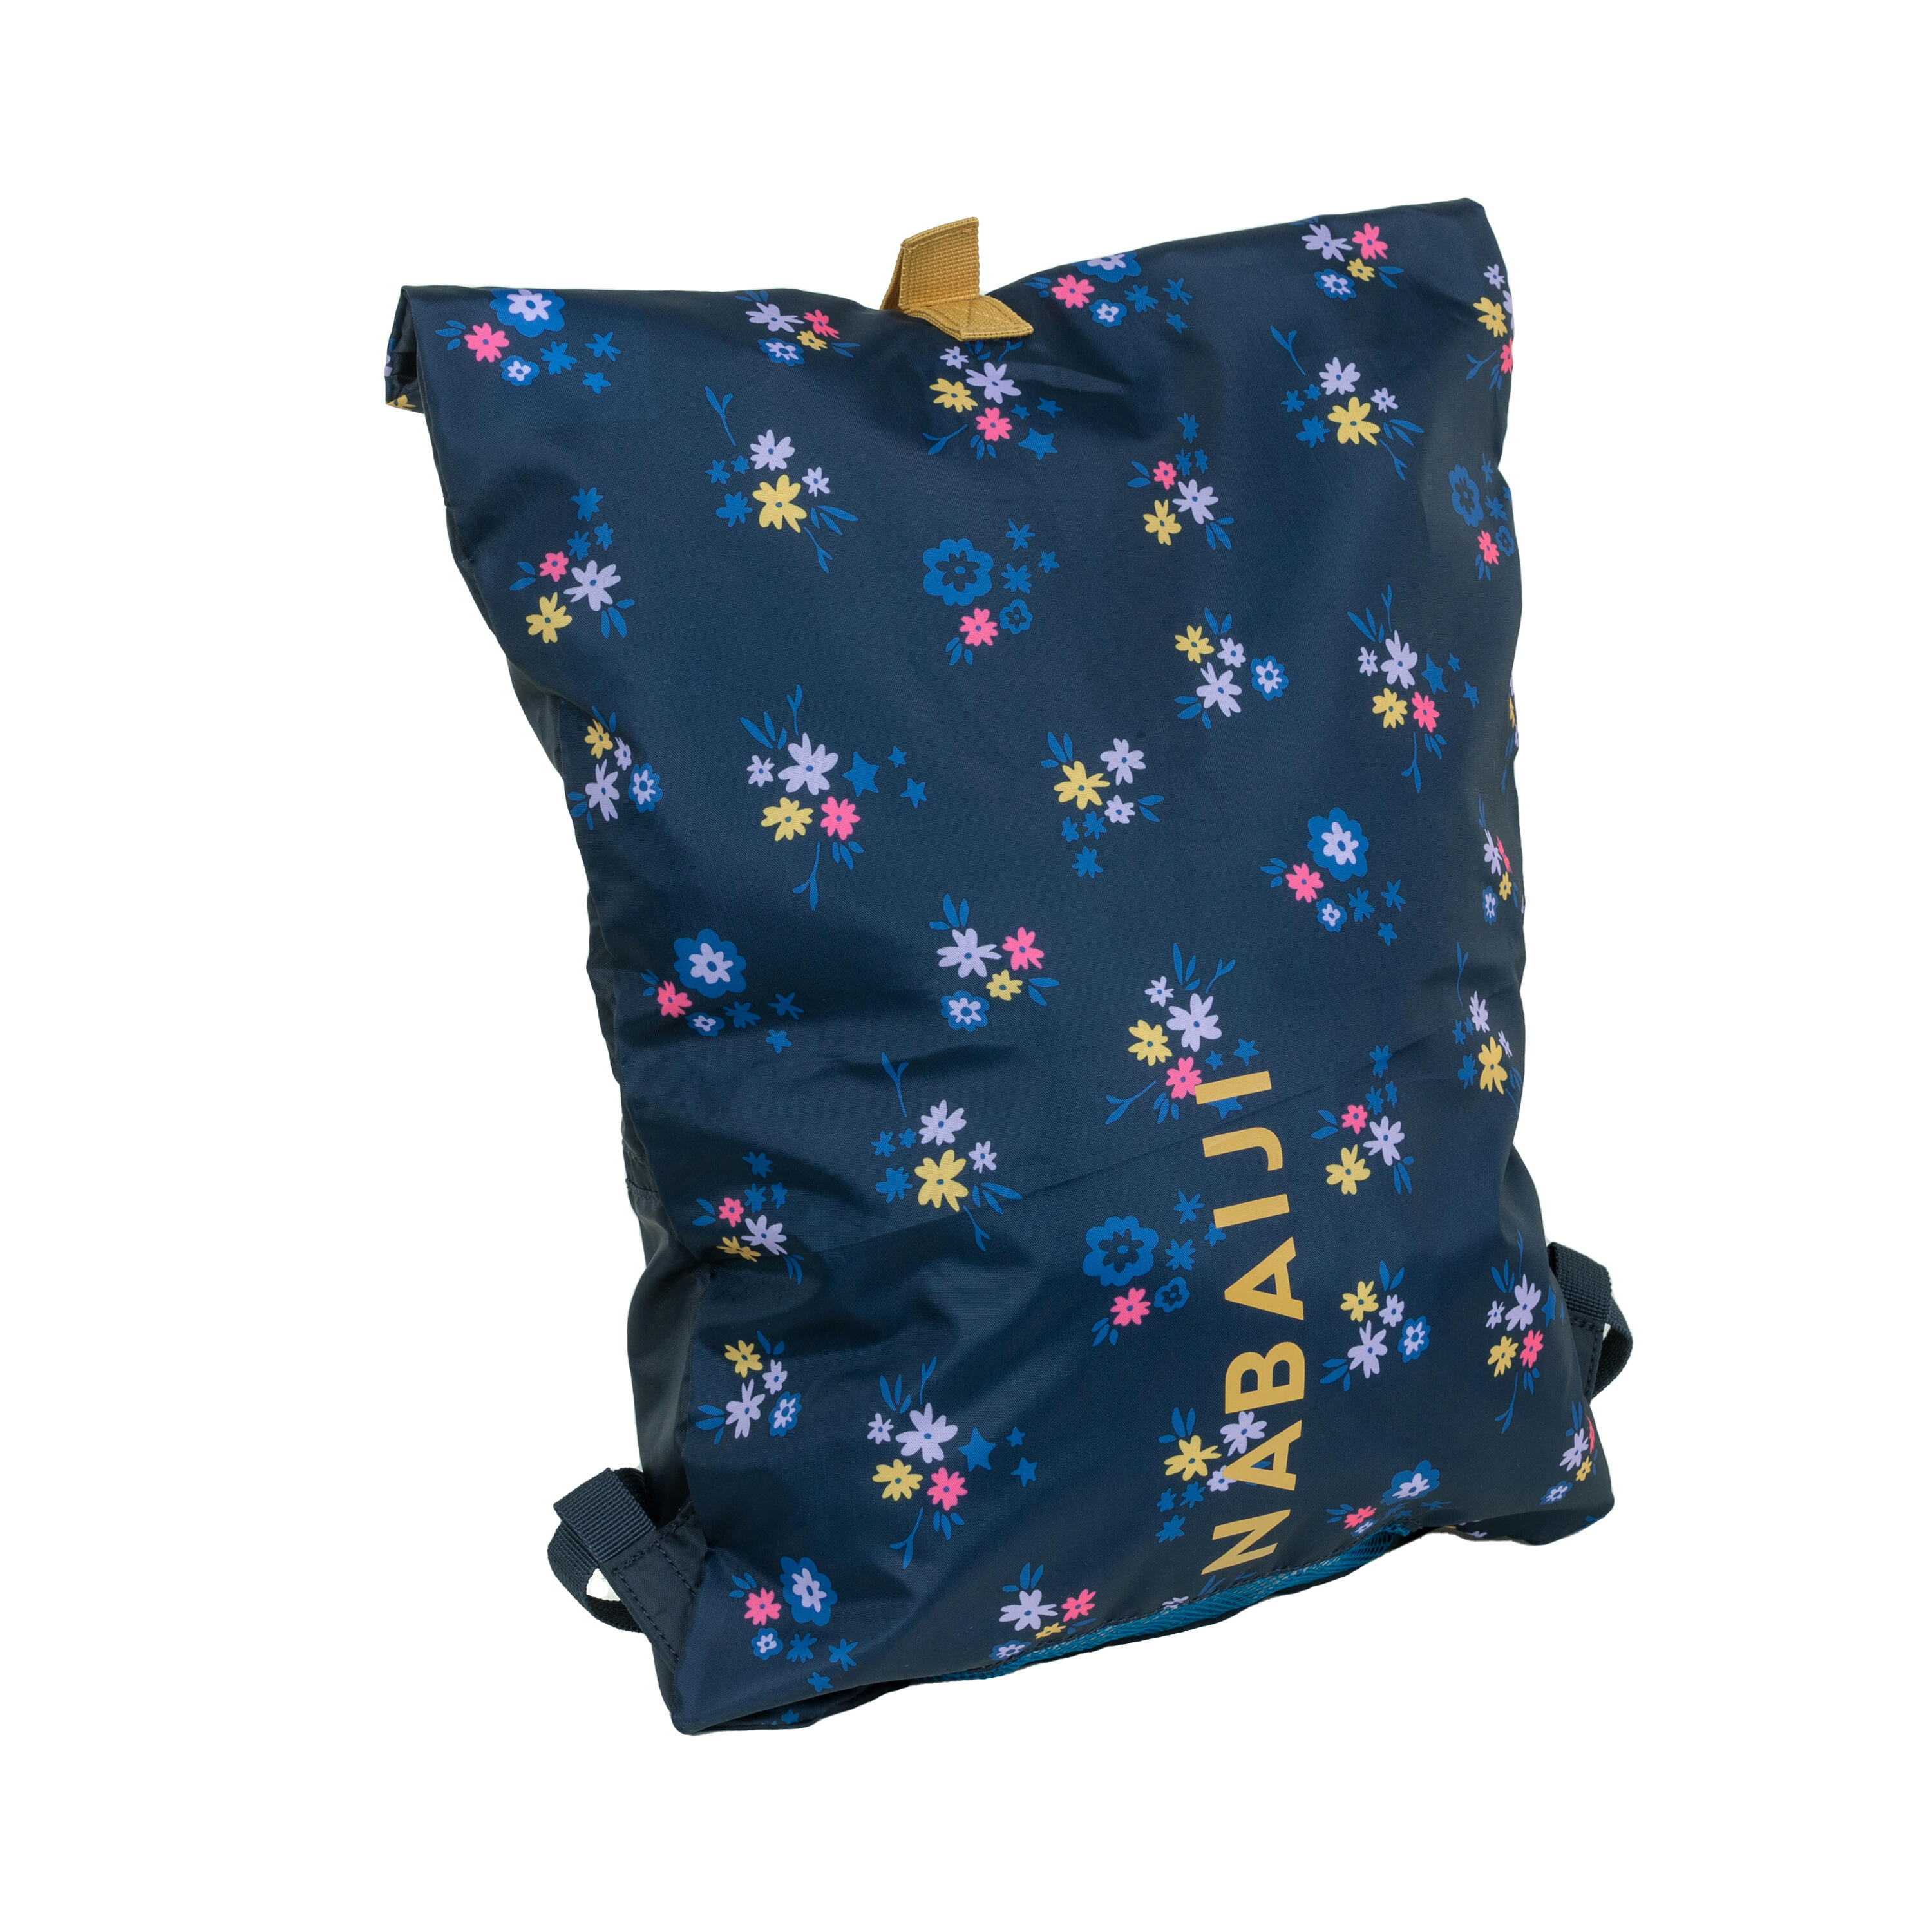 Swimming backpack Lighty Lily navy 6/6